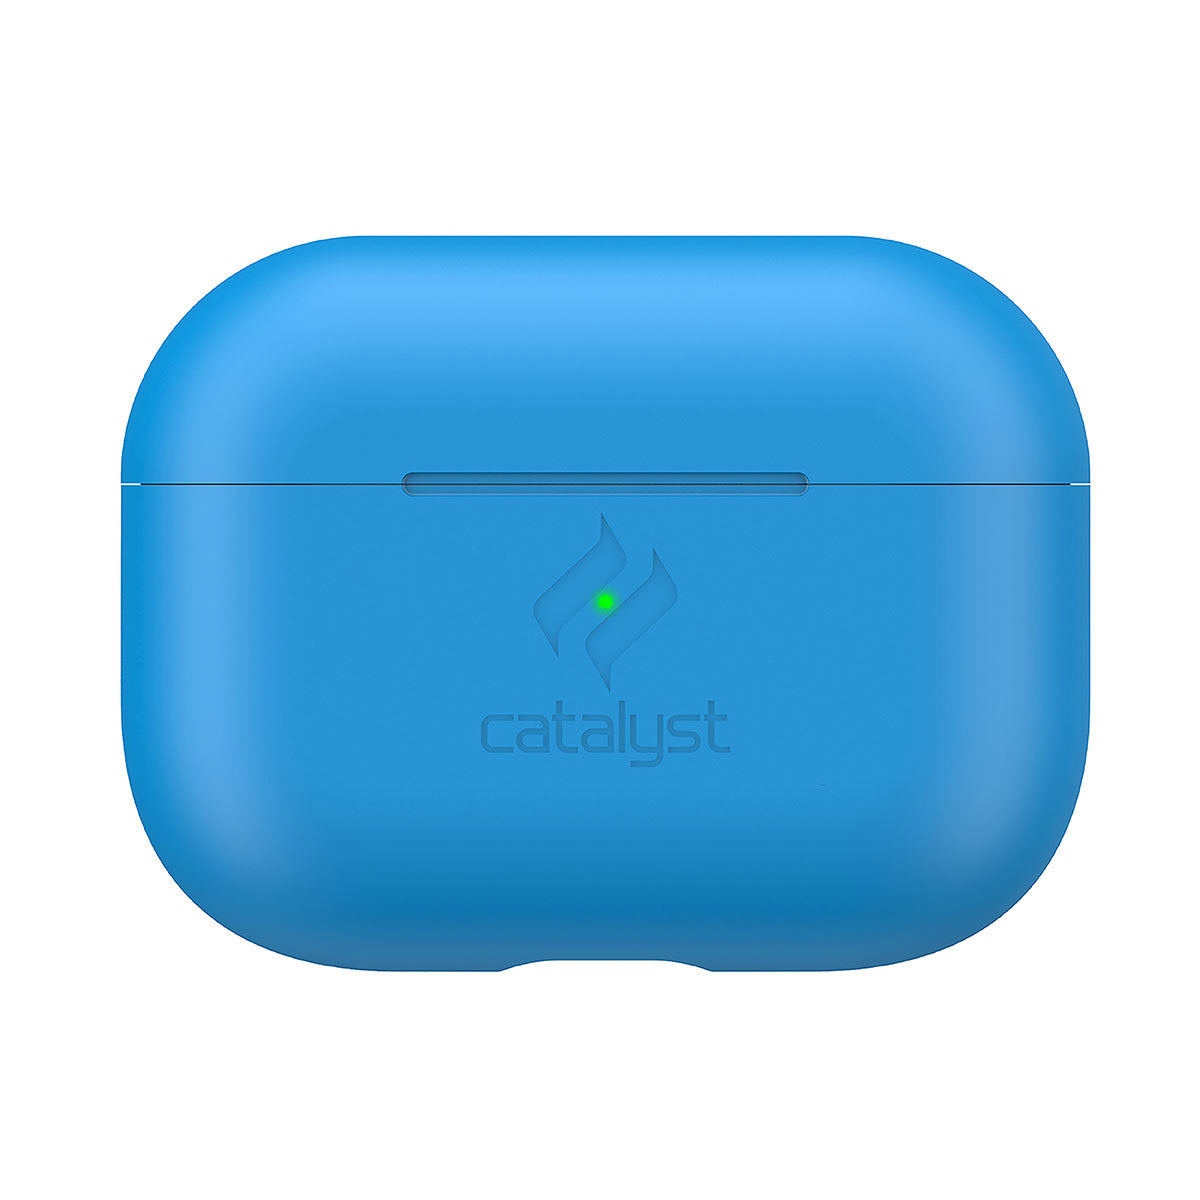 Catalyst airpods pro gen 2/1 slim case showing front view of the case in neon blue colorway